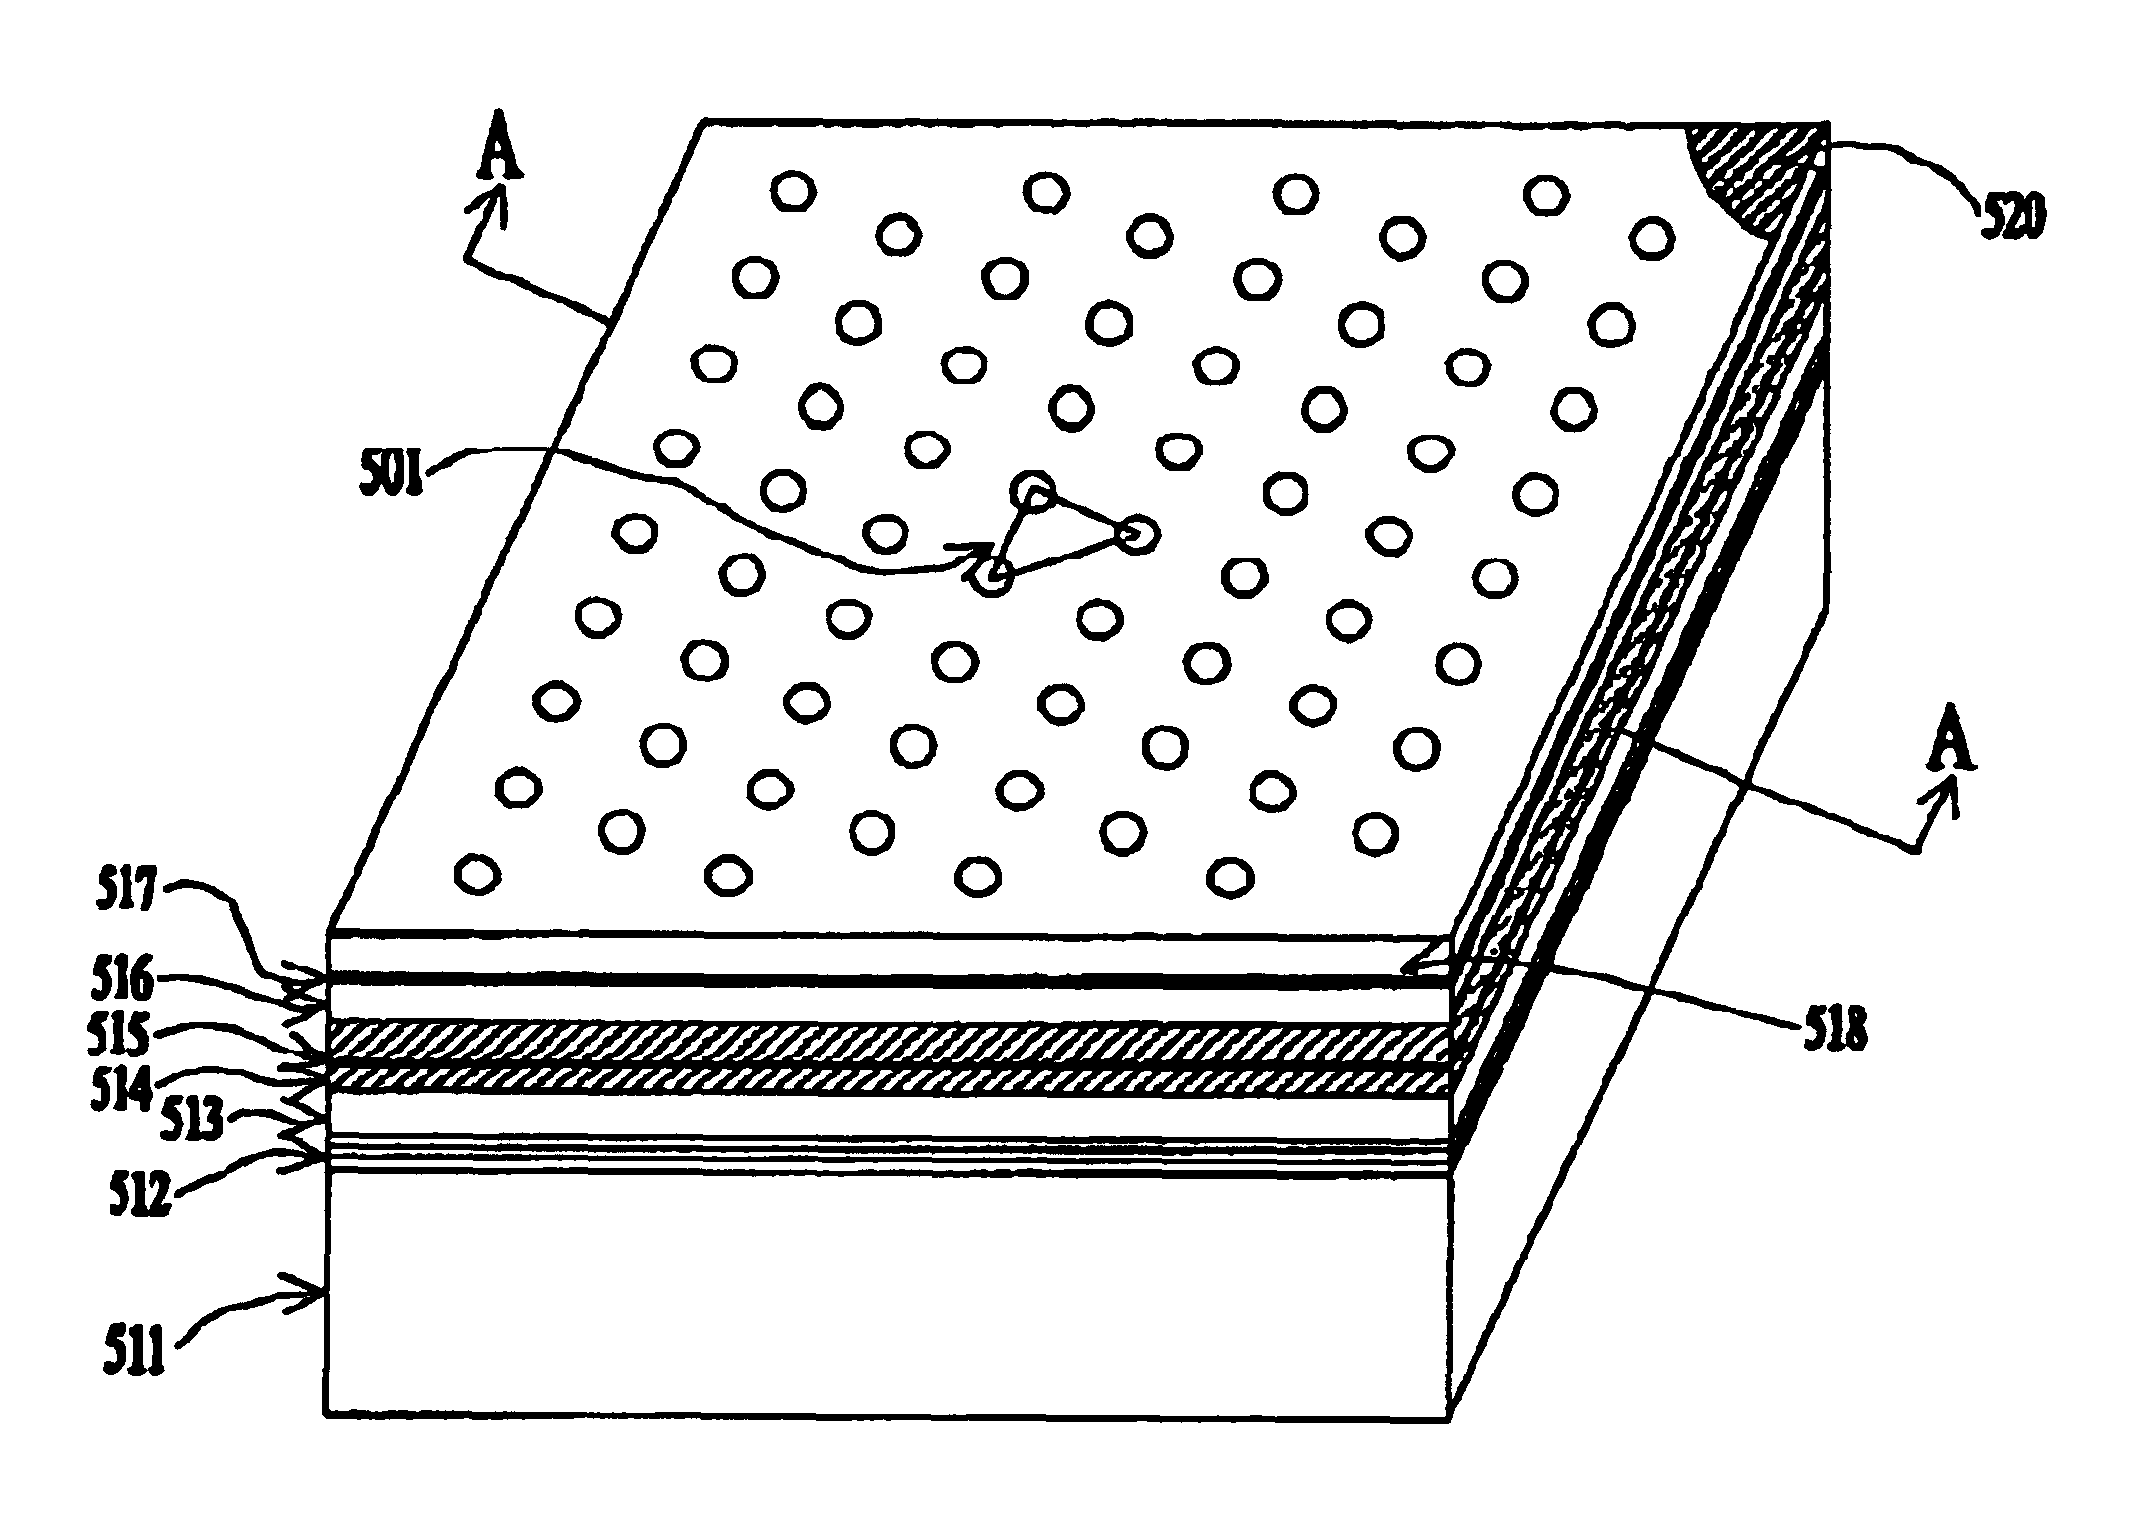 Light emitting diodes with current spreading layer